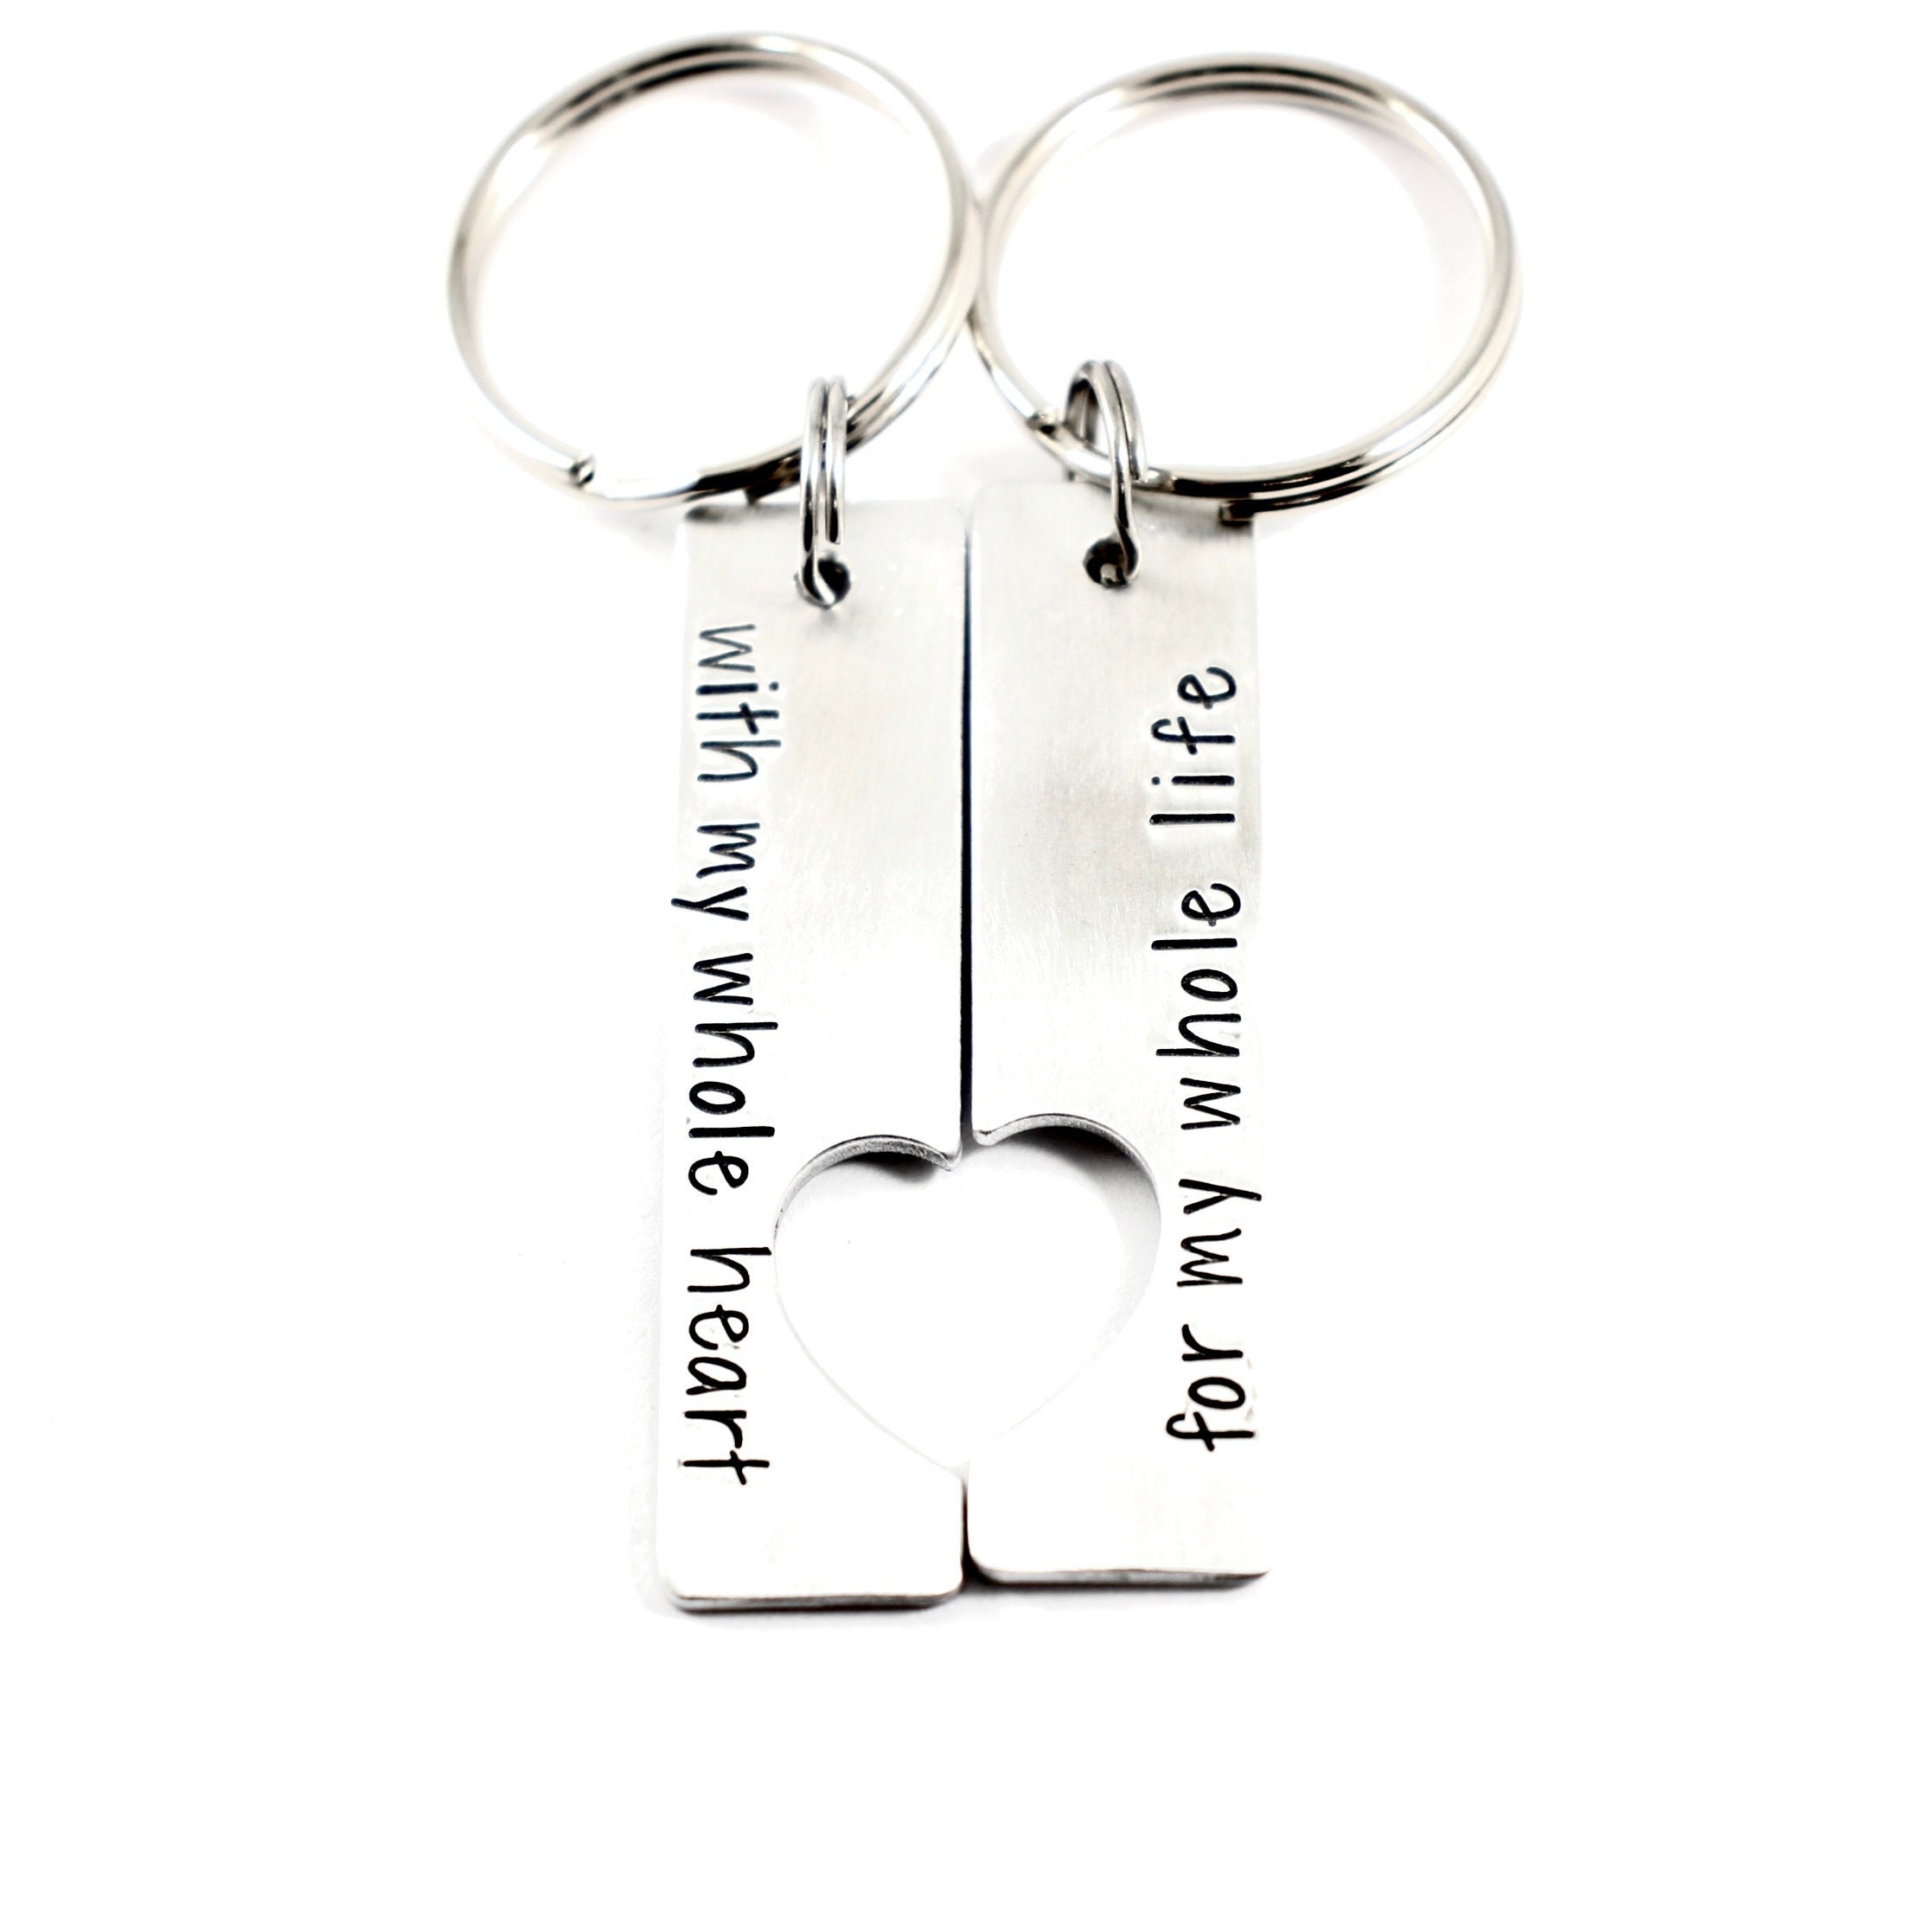 completelywiredjewel Thelma and Louise Keychains Available As A Set or A Single Keychain - You're The Thelma to My Louise You're The Louise to My Thelma